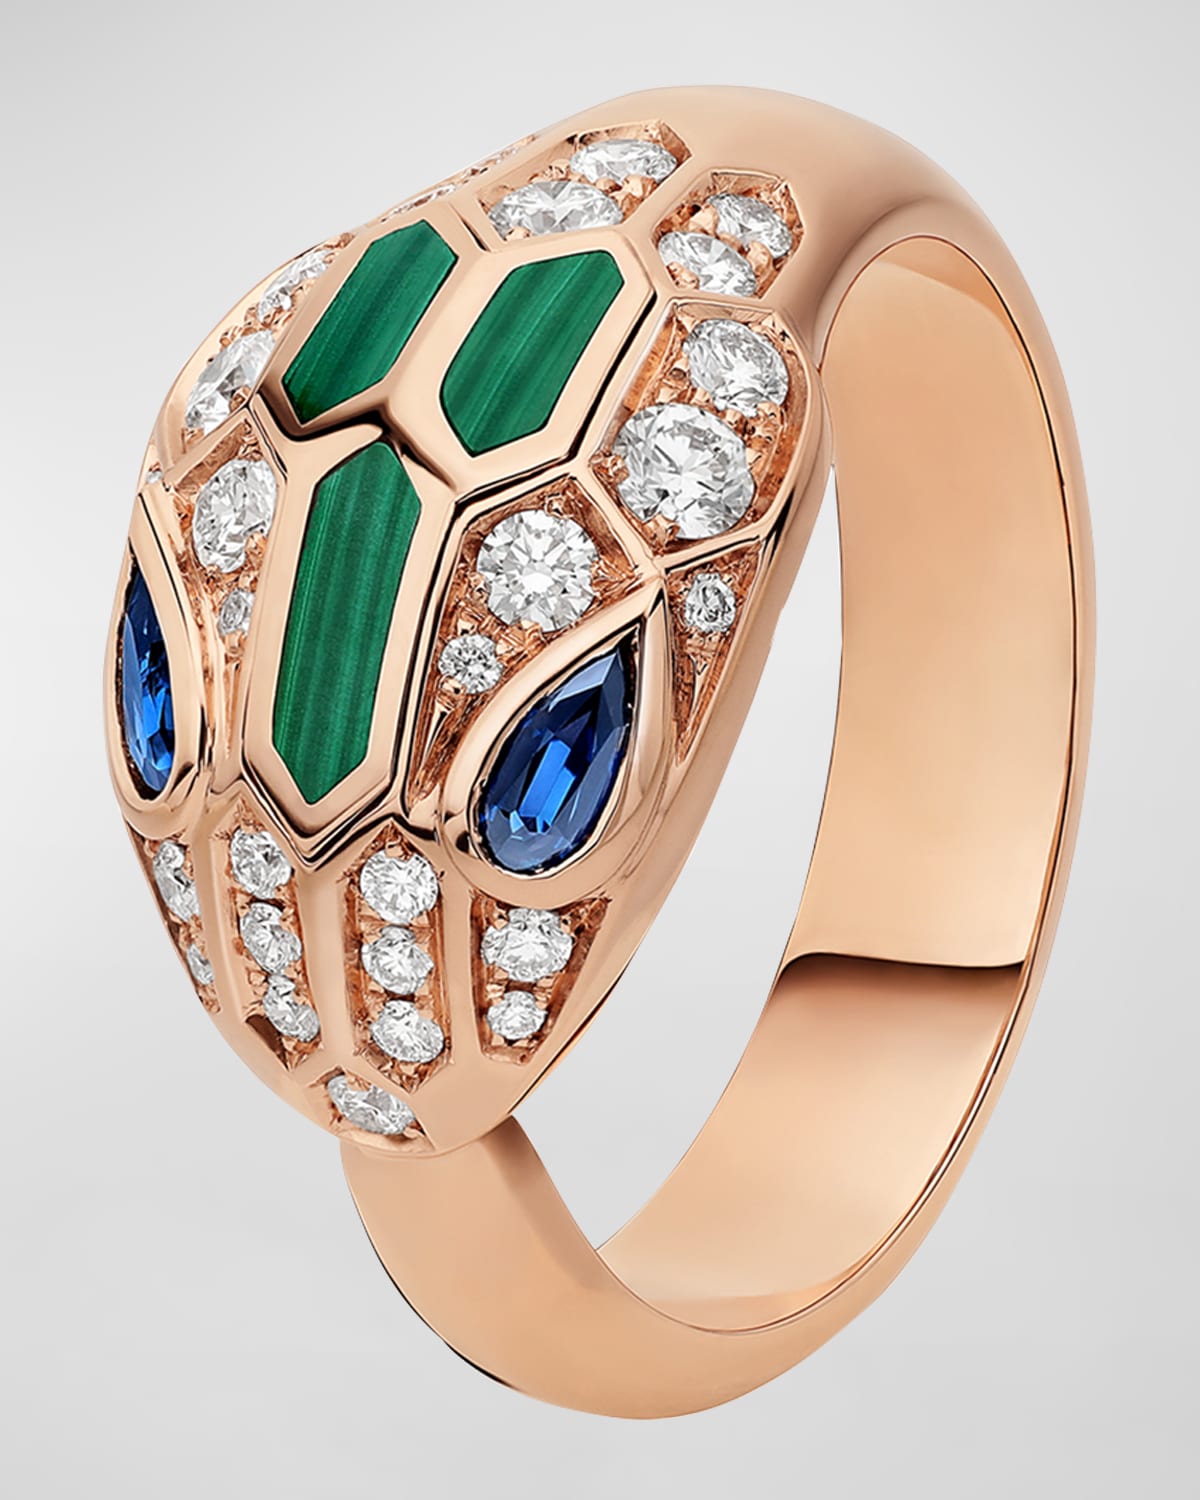 Serpenti Ring in 18k Rose Gold with Malachite and Diamonds, Size 55